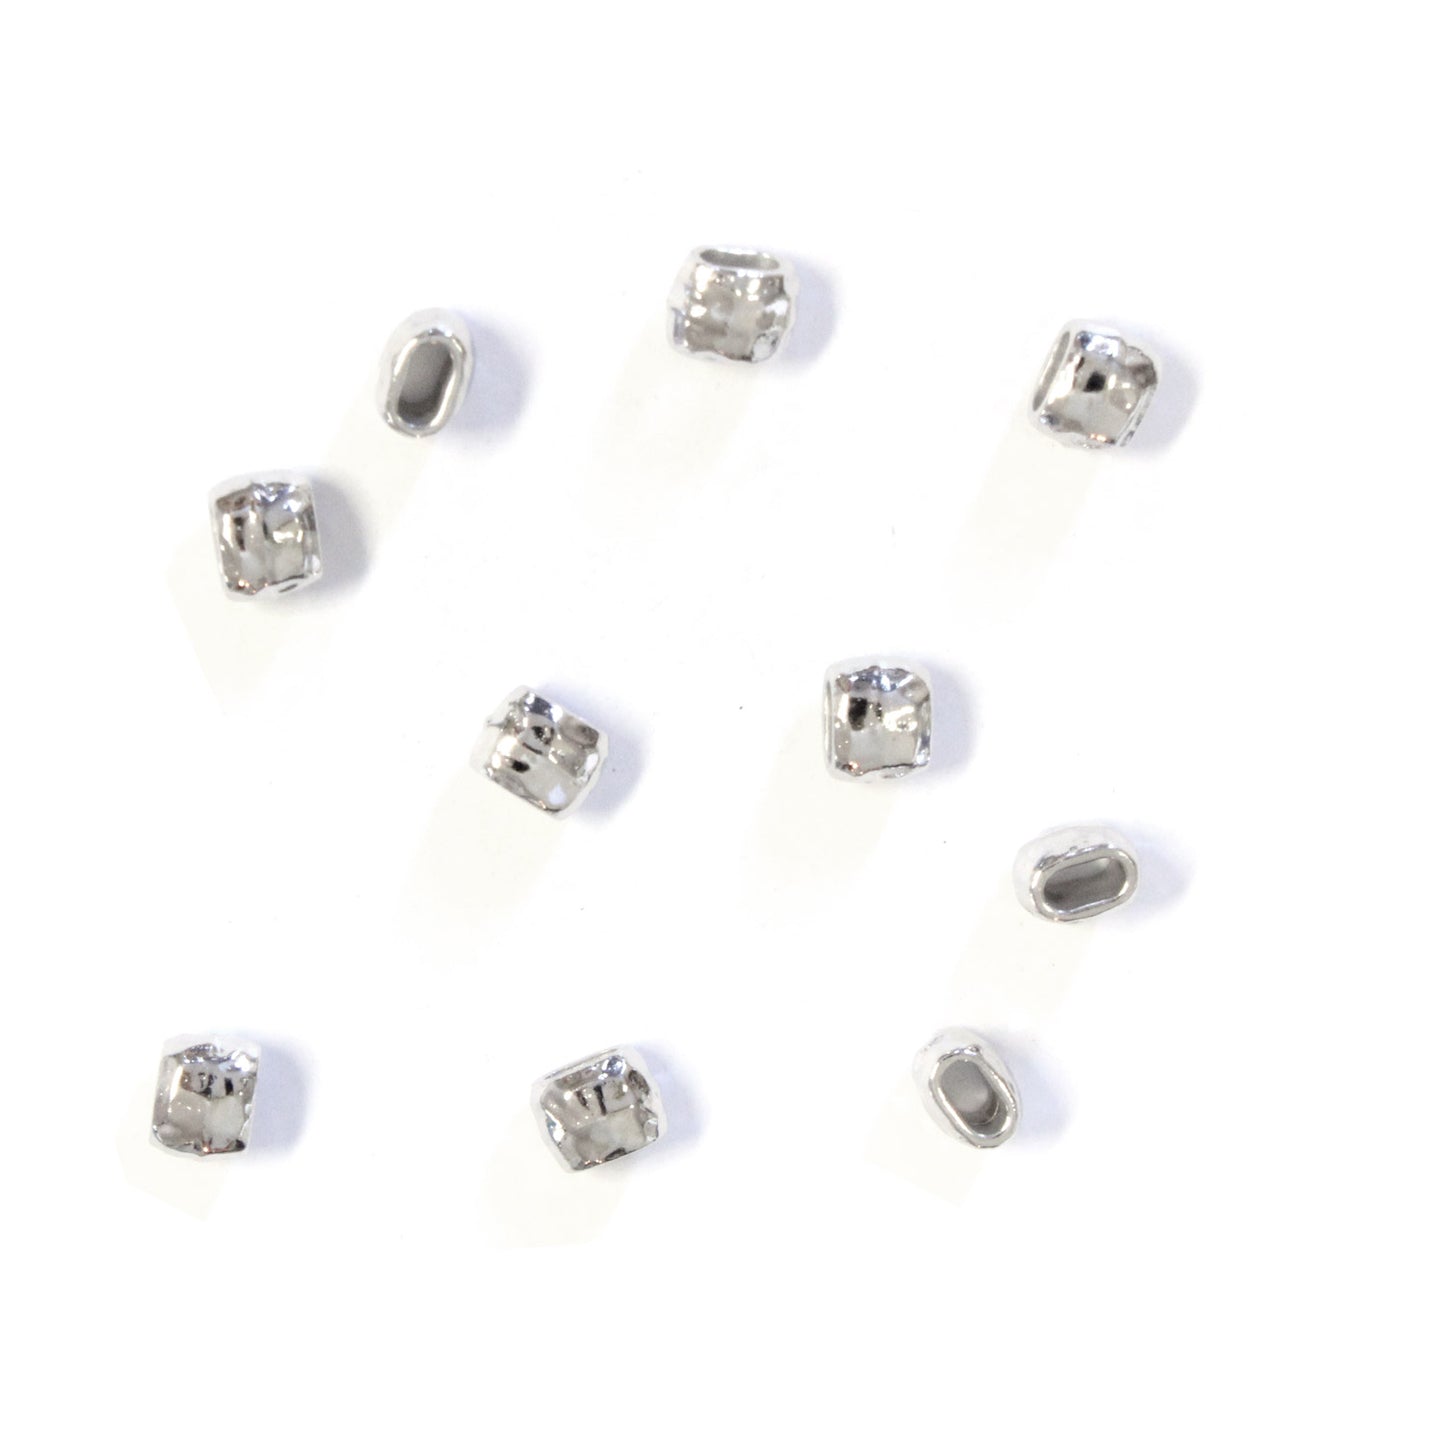 TierraCast 4x2mm Distressed Barrel Bead / pewter with a bright rhodium finish / 94-5791-61